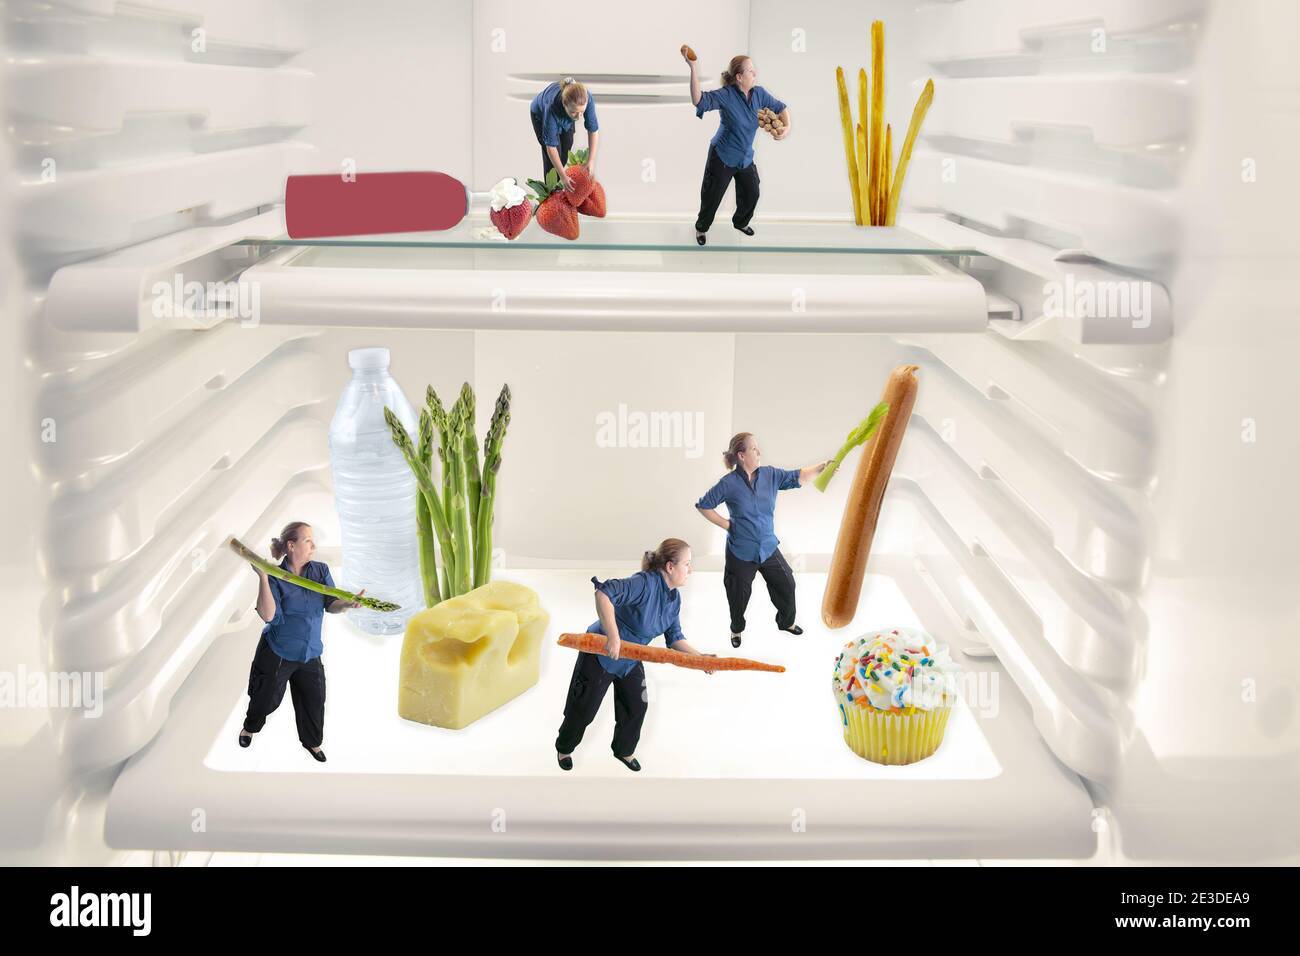 Mature woman fighting junk food with healthy food inside open refrigerator. Stock Photo